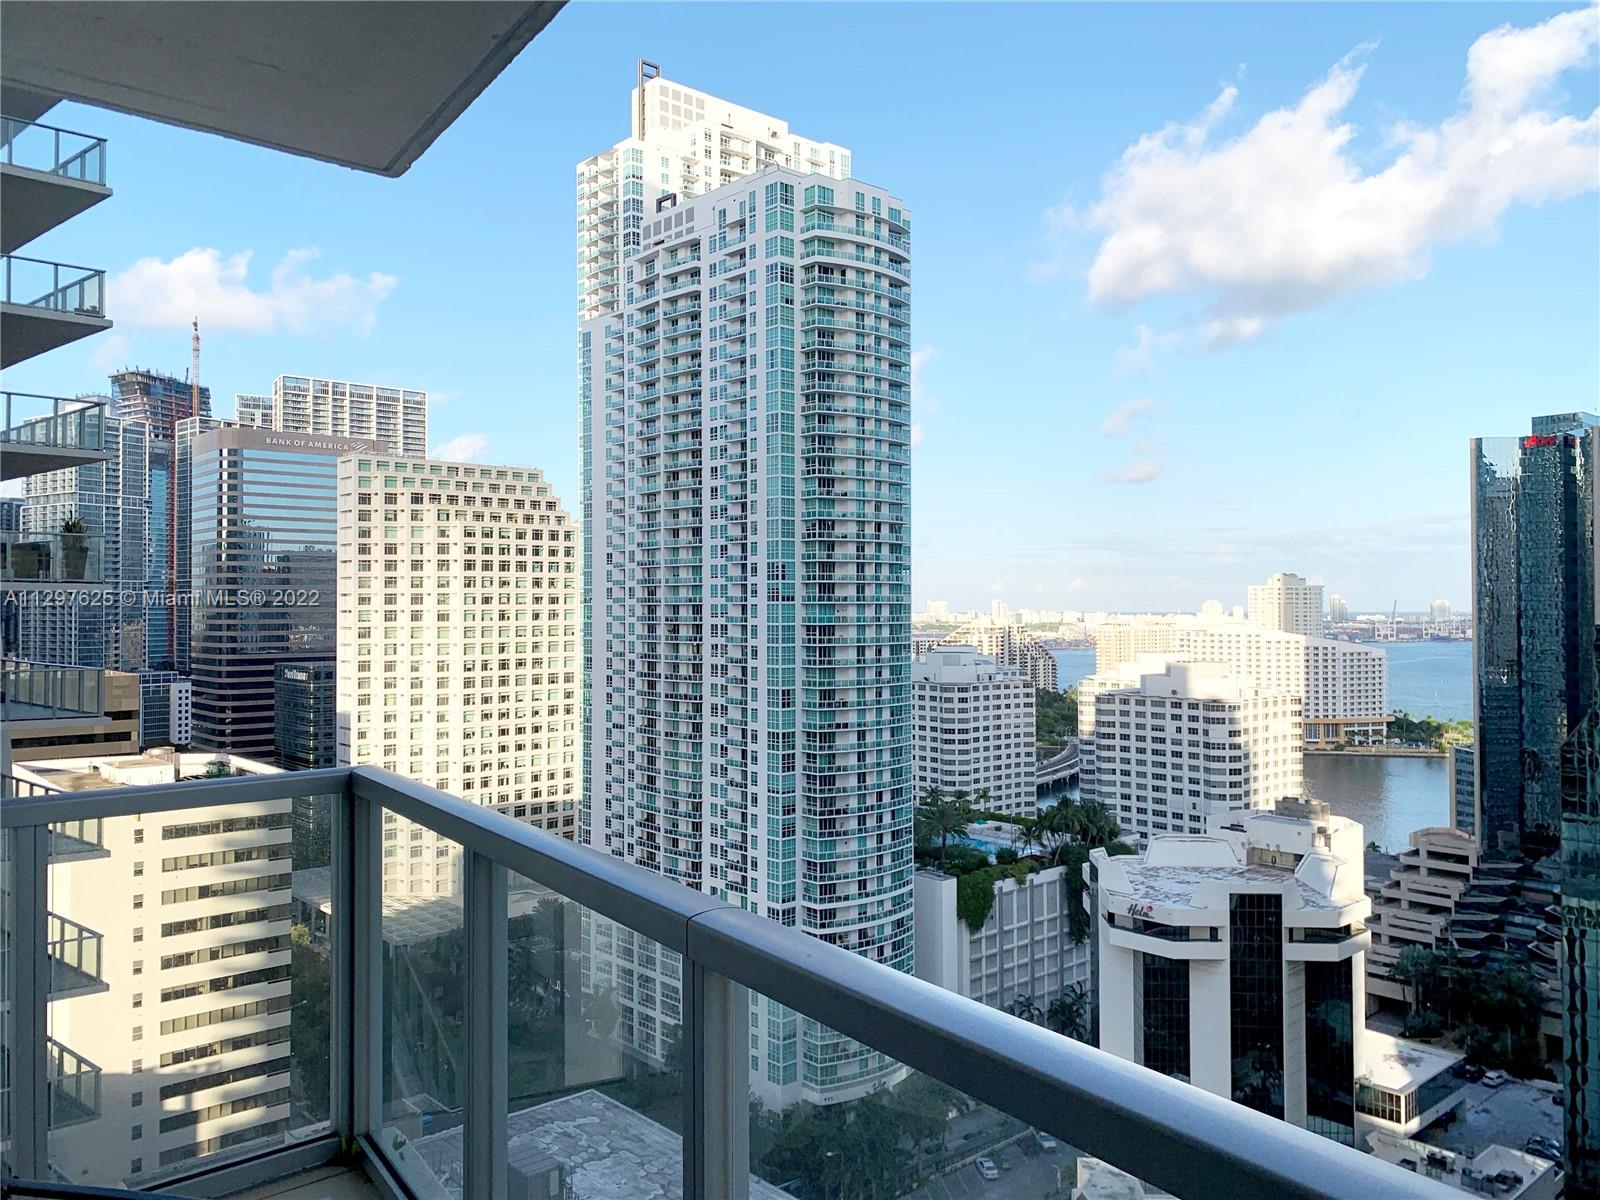 MAGNIFICENT UNIT W/ WATER VIEW LOCATED IN THE HEART OF BRICKELL AVE. 1 BEDROOM/1 BATH. WALKING DISTANCE TO RESTAURANTS & EASY ACCESS TO HIGHWAYS. AMENITIES: GOLF FACILITY,GYM, JOGA ROOM, SPA AND NICE POOL DECK. STEPS FROM MARY BRICKELL VILLAGE .****UNIT RENTED FURNISHED*